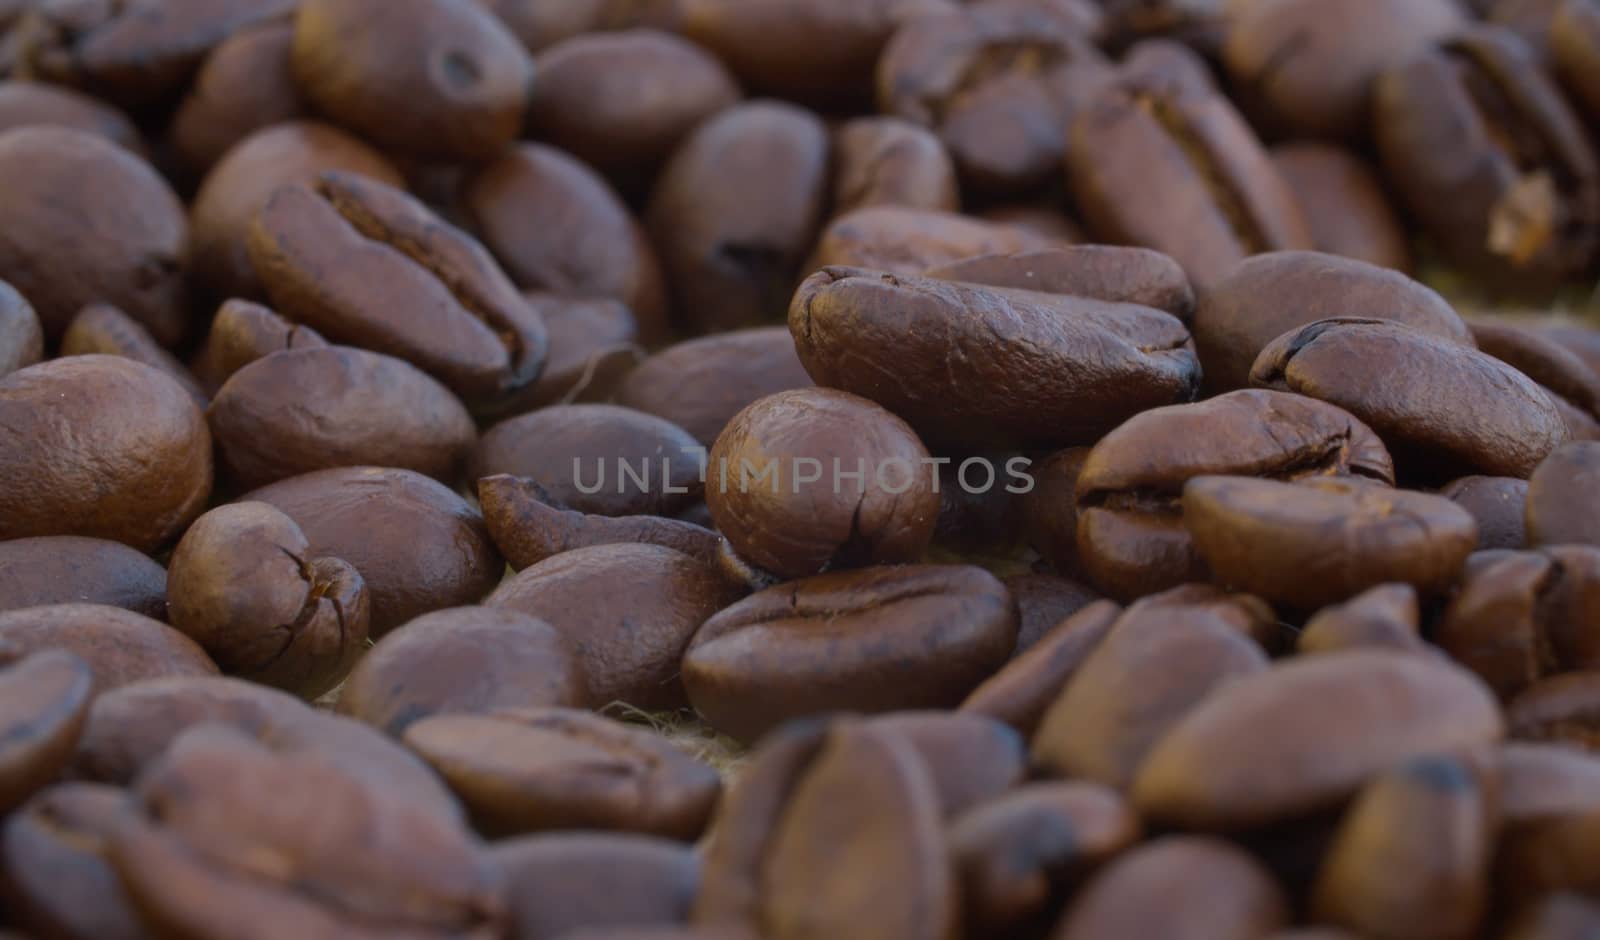 Extreme close up of coffee beans. Texture, food background. Macro shooting